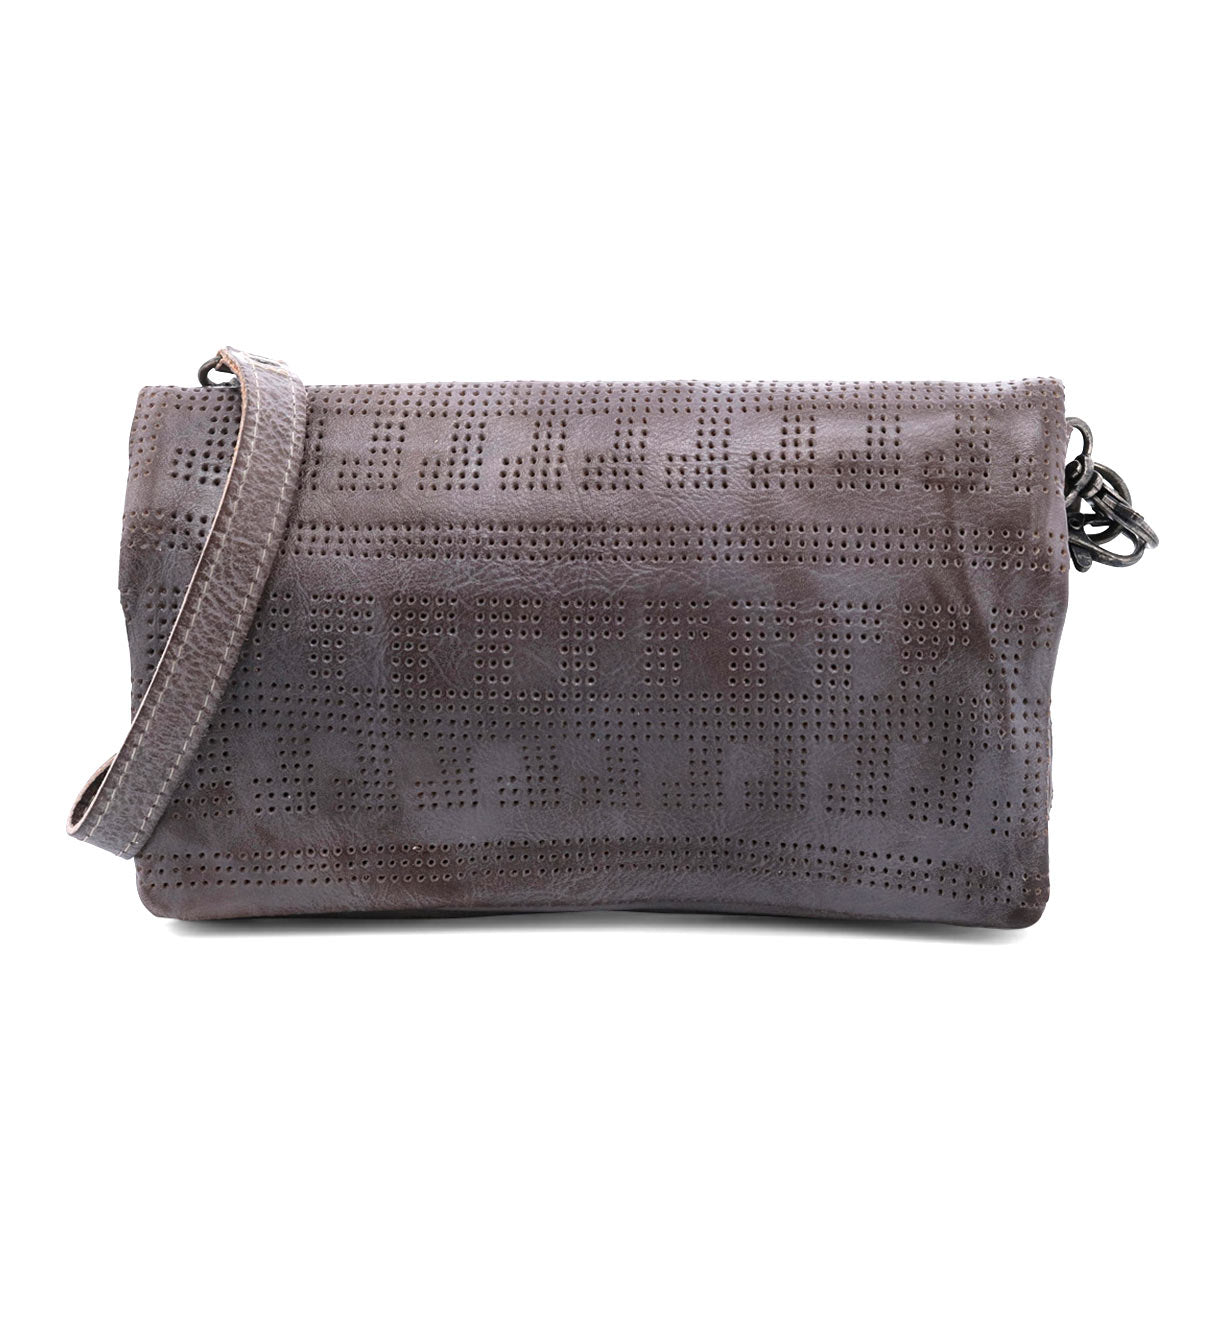 Bed Stu perforated leather crossbody bag.